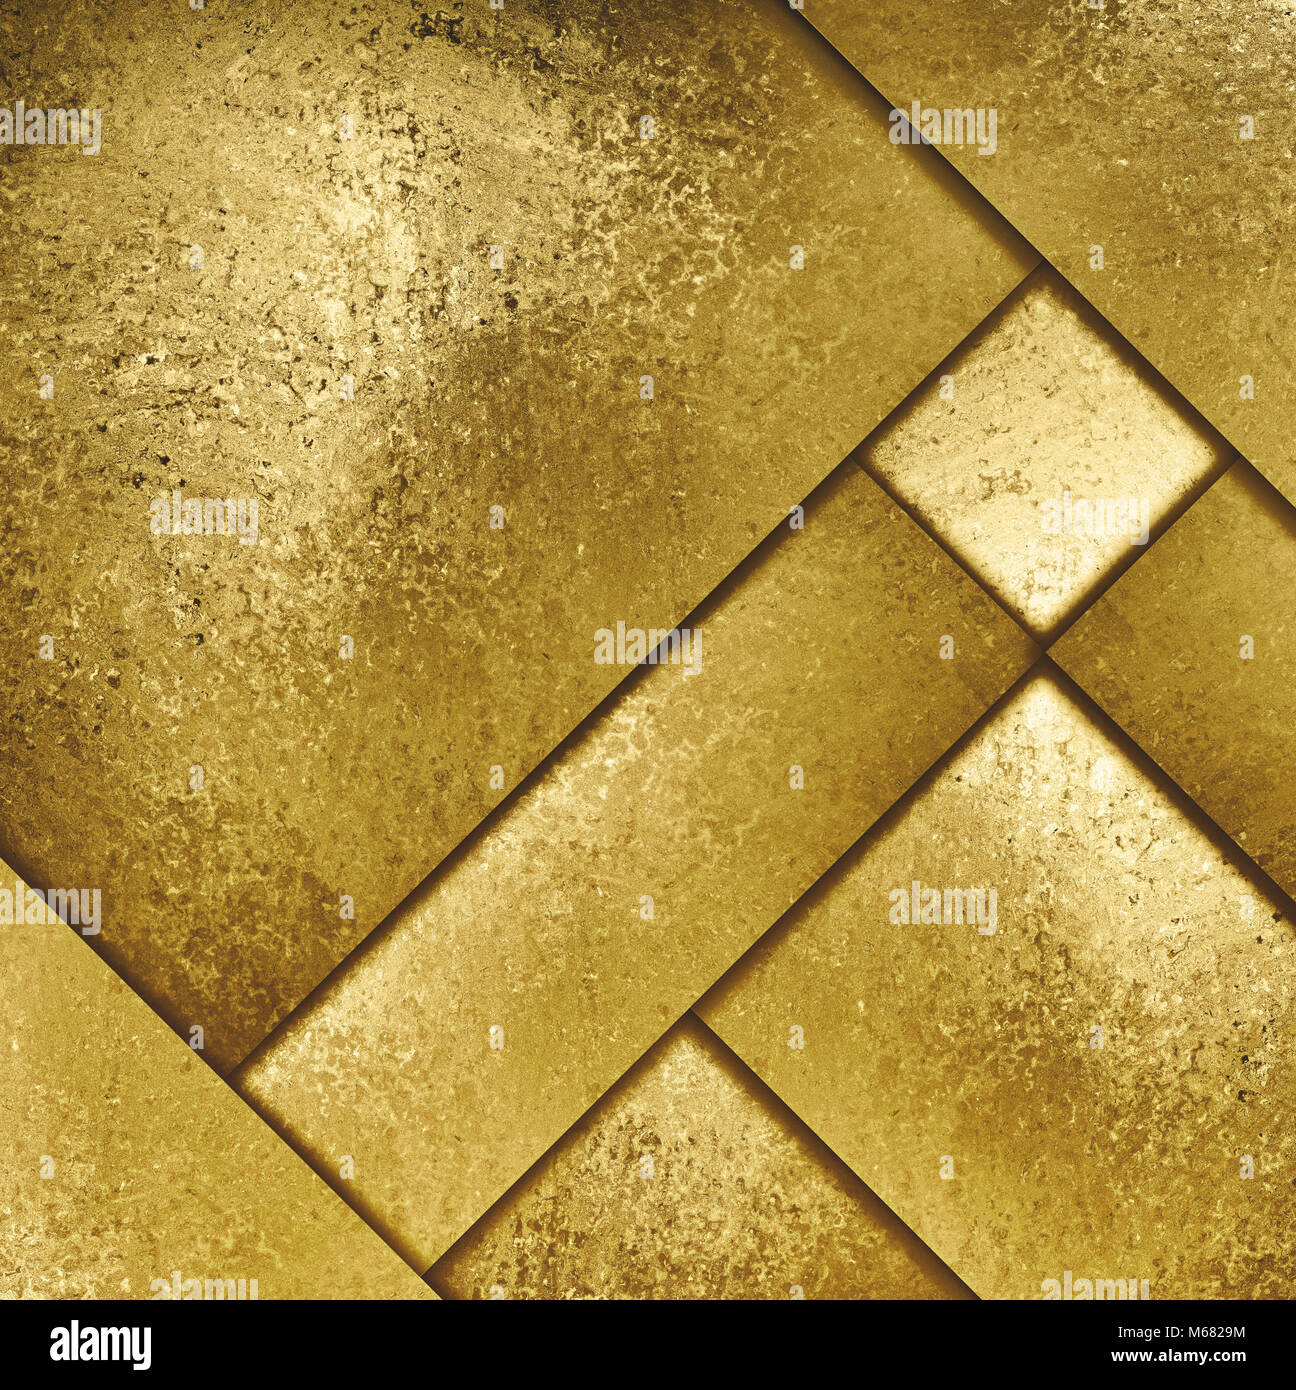 elegant gold background with abstract material design layers of metal plate with dark lines in intersecting pattern, fancy golden luxury backdrop Stock Photo